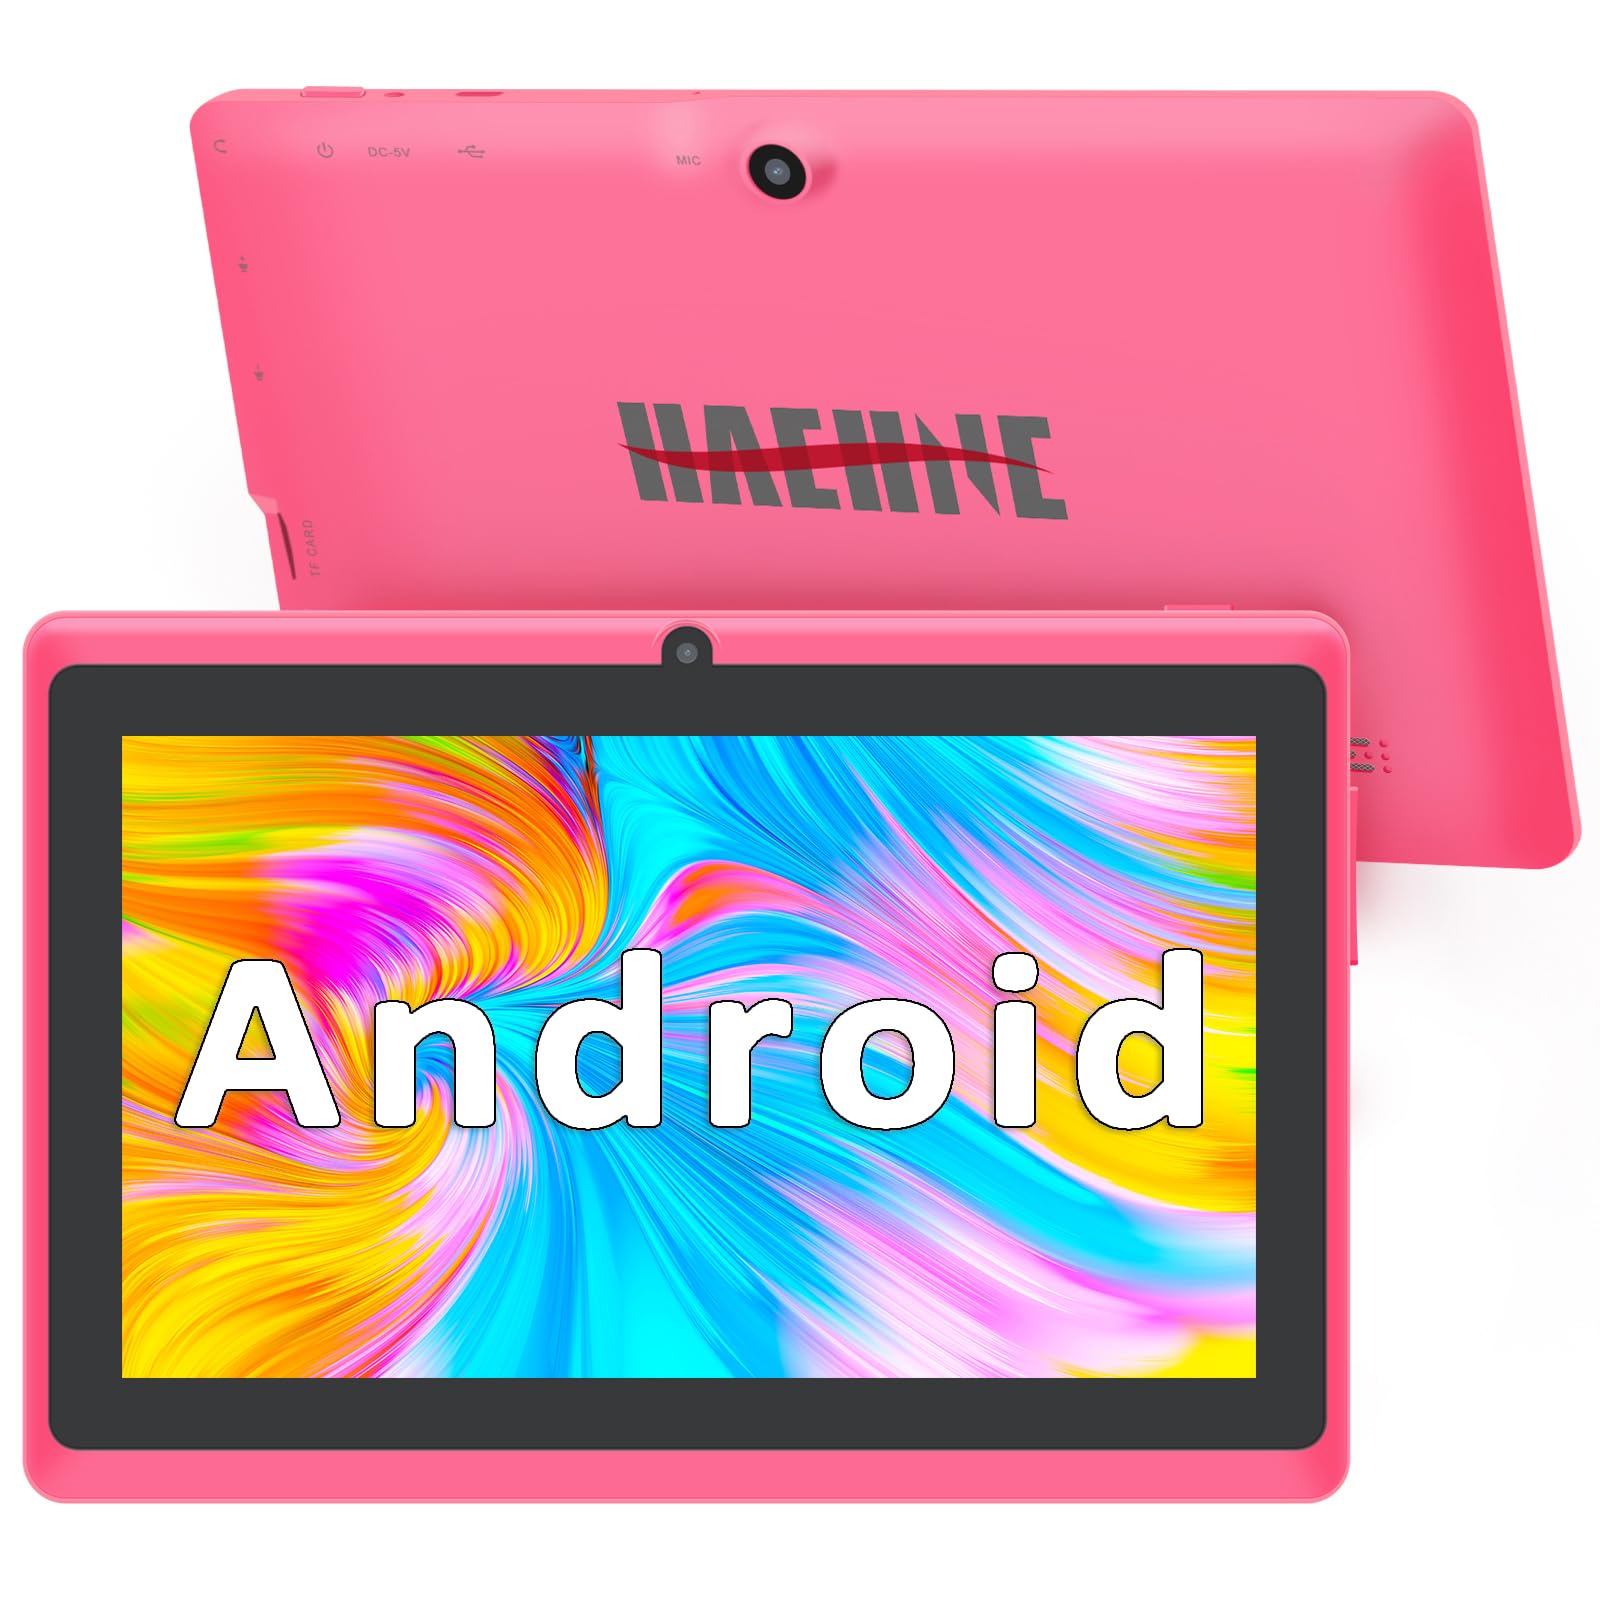 Haehne 7 Zoll Tablet PC, Android 5.0, Quad Core A33, 1GB RAM 8GB ROM, Dual Kameras, WiFi, Bluetooth, Kapazitiven Touchscreen, Pink